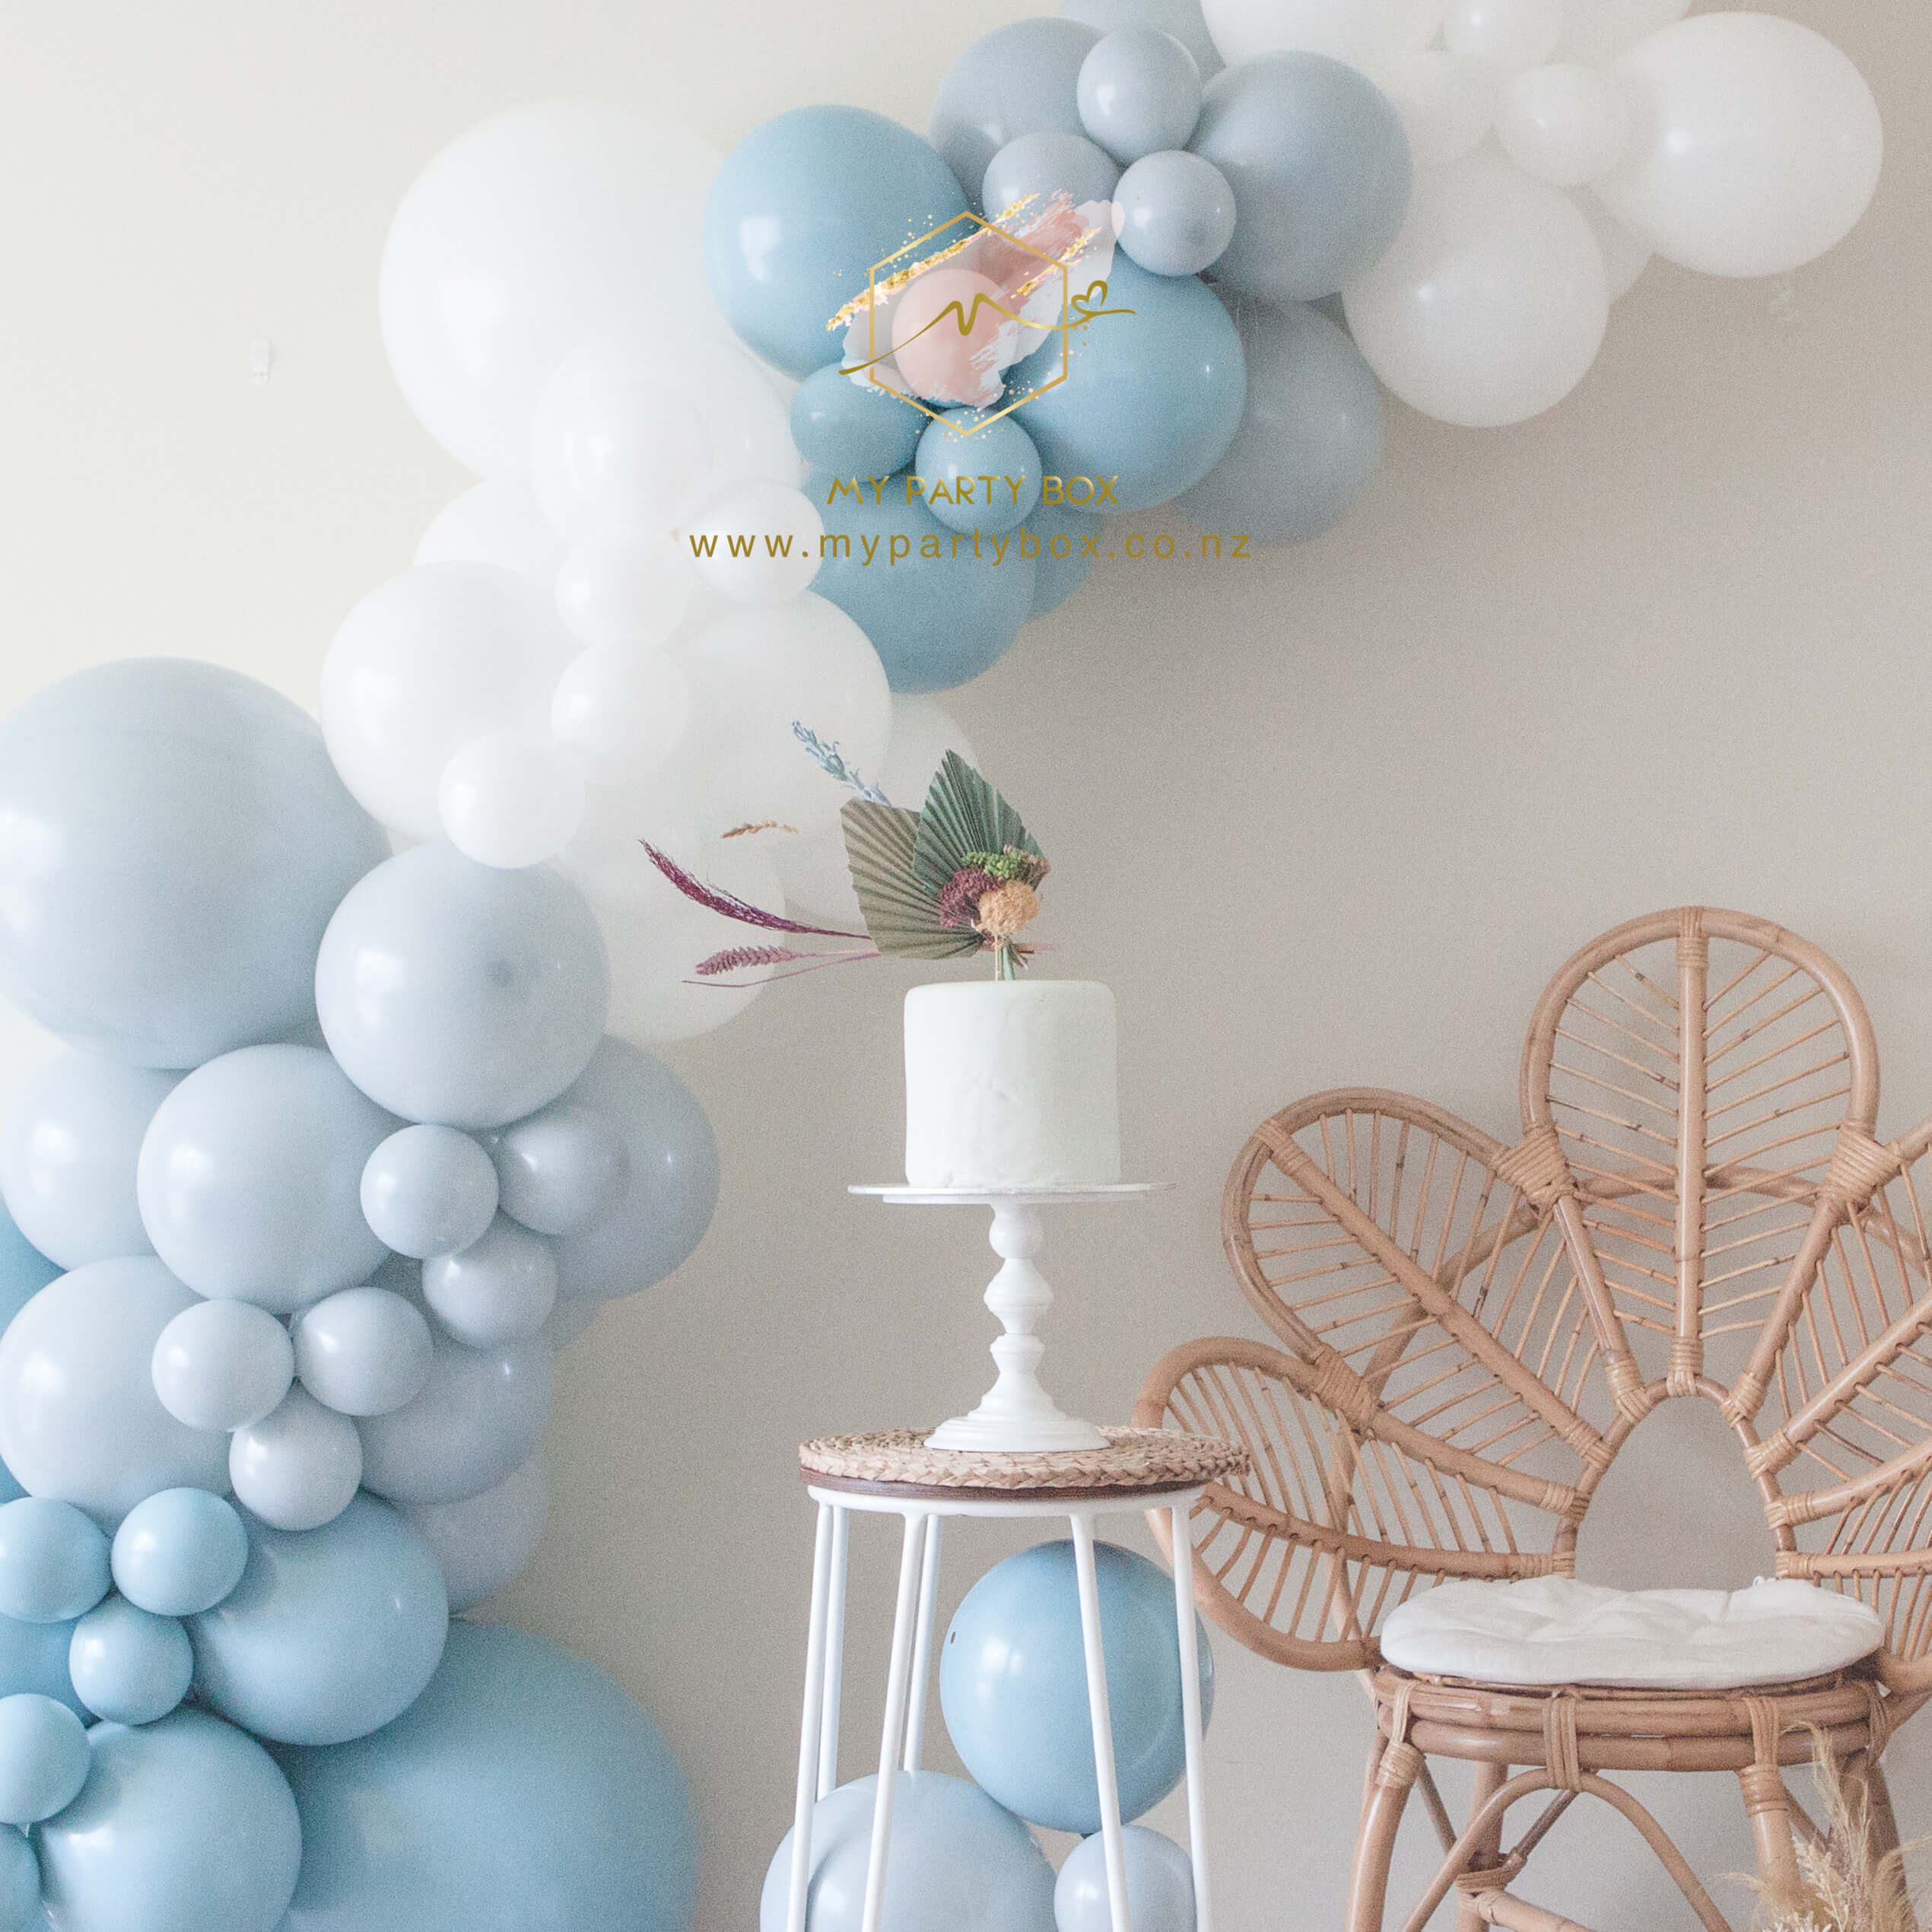 It's a boy Balloon Garland DIY Kit  with details